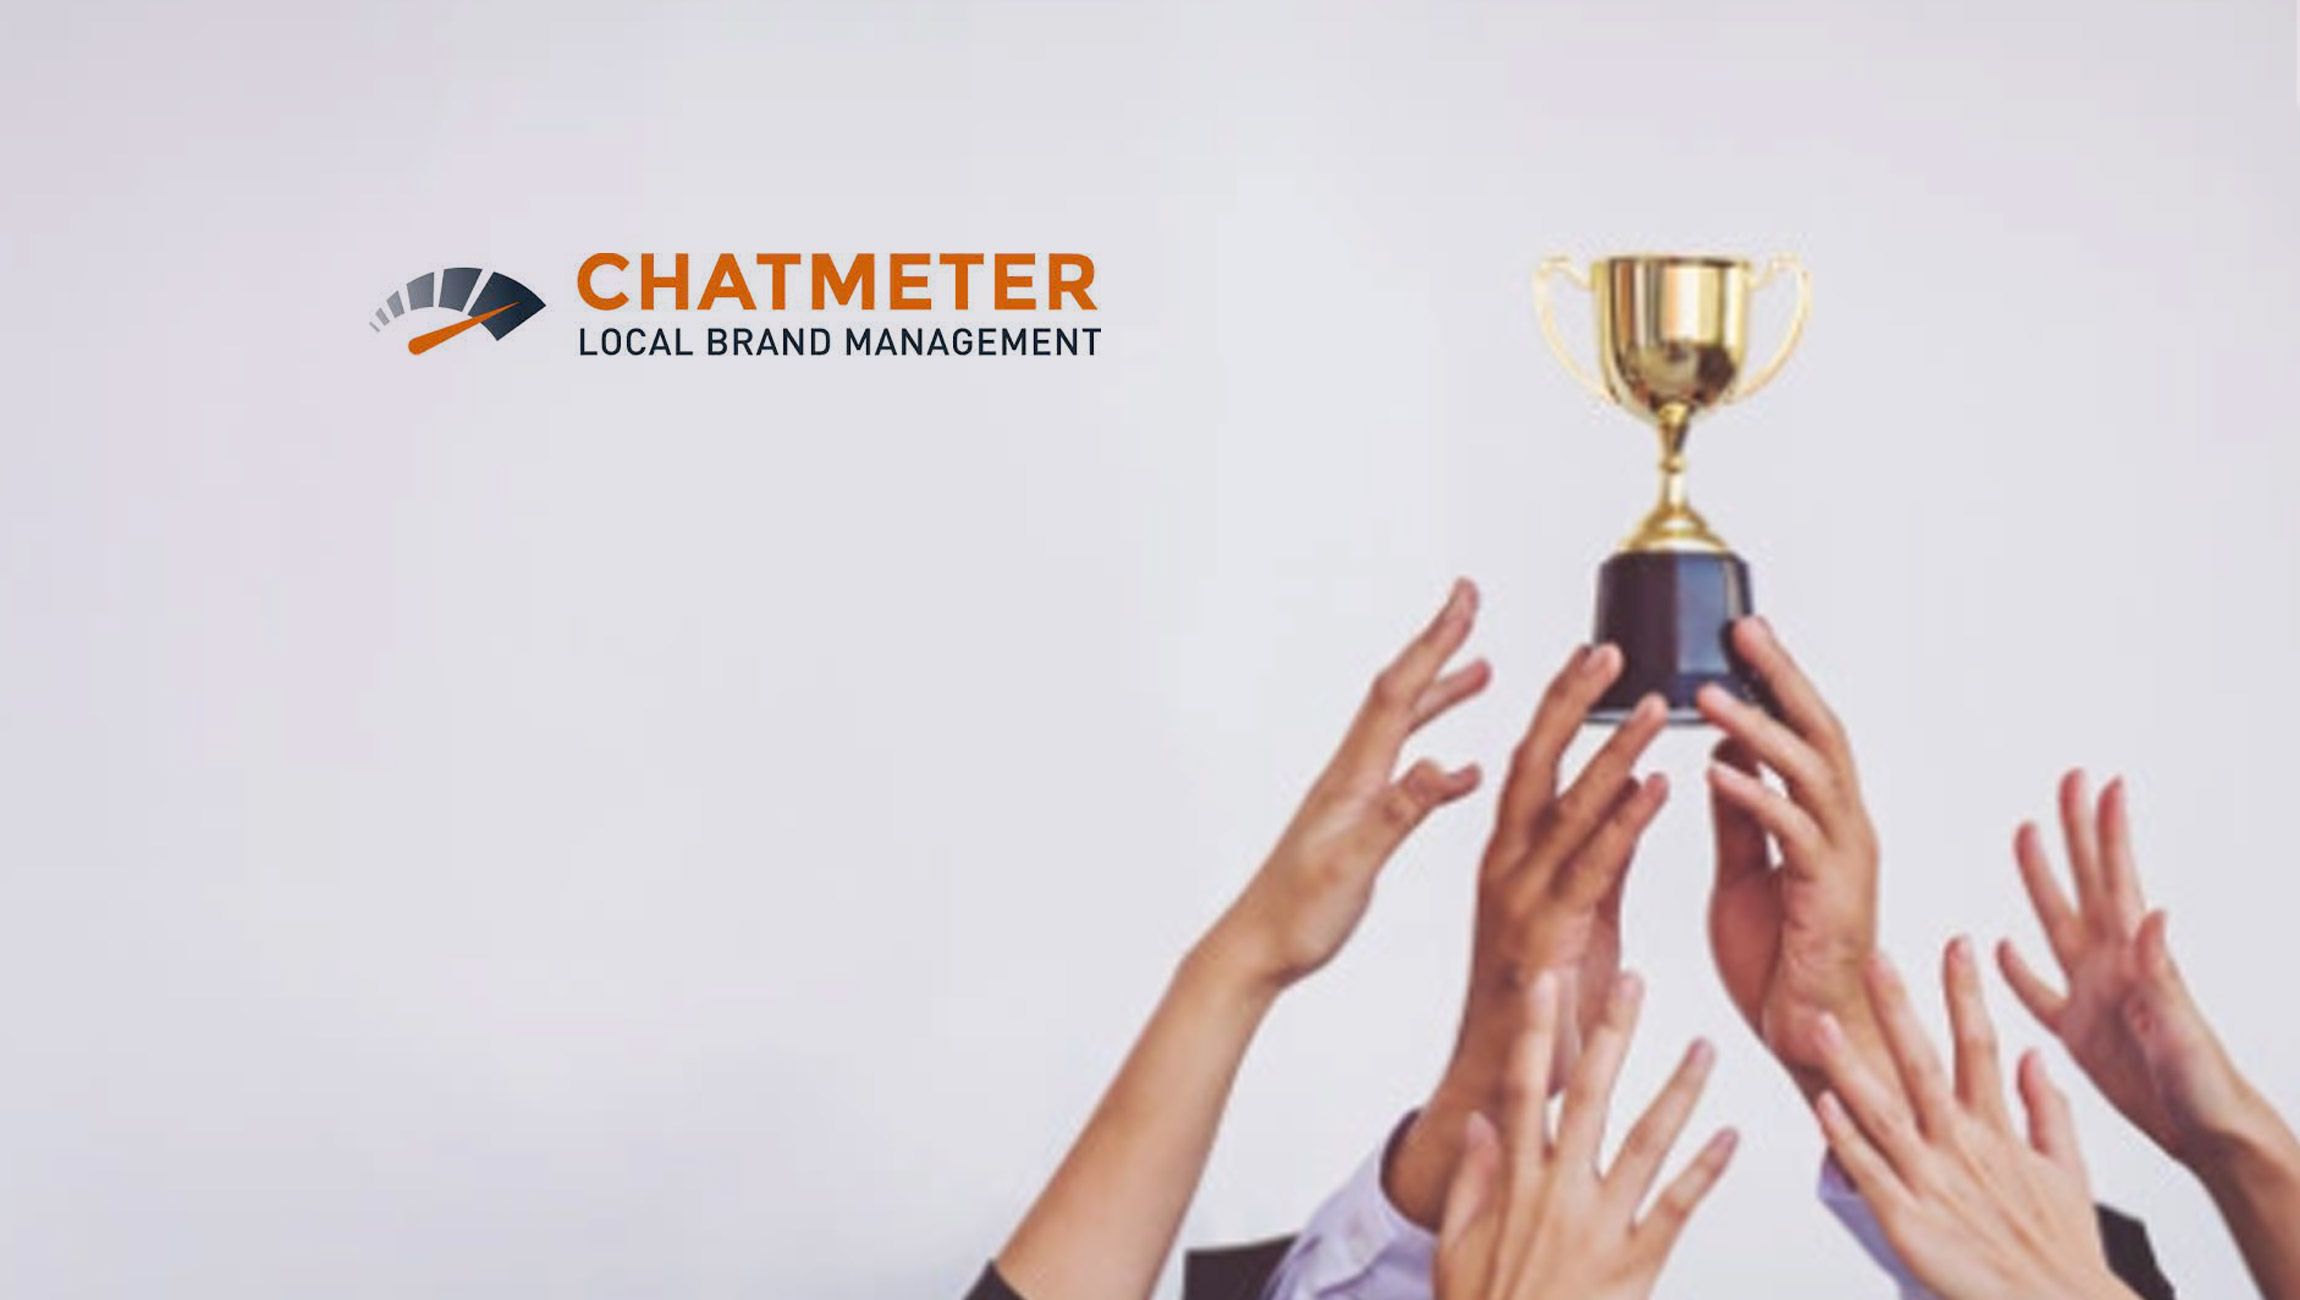 G2-Again-Recognizes-Chatmeter-as-an-Industry-Leader-With-Multiple-Awards